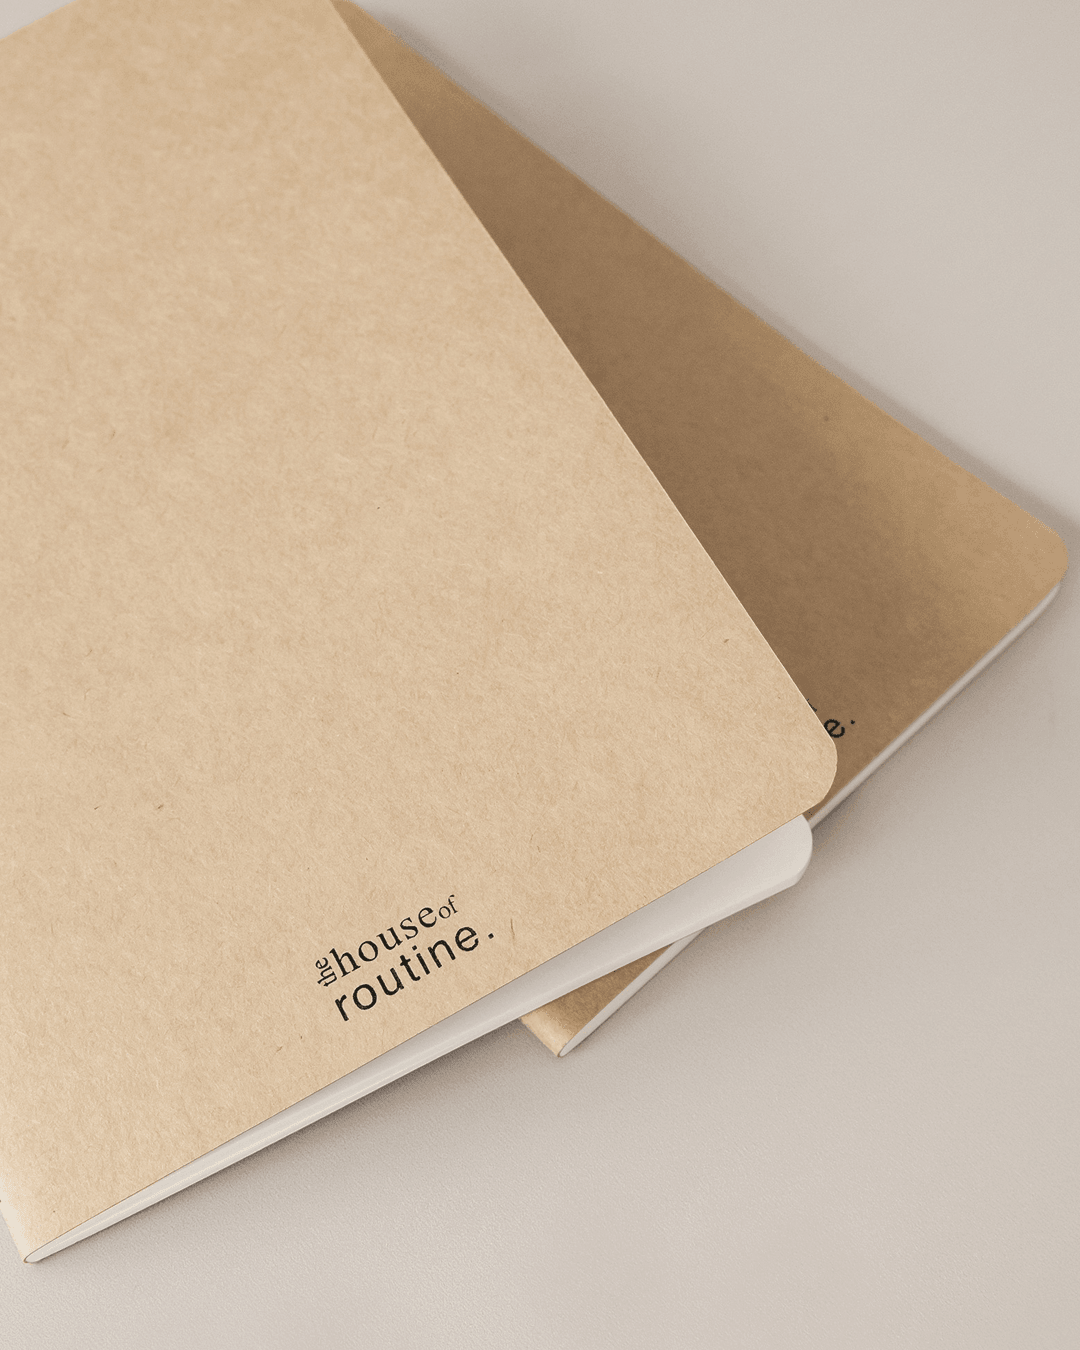 Inserts for Personal Journal - The House of Routine